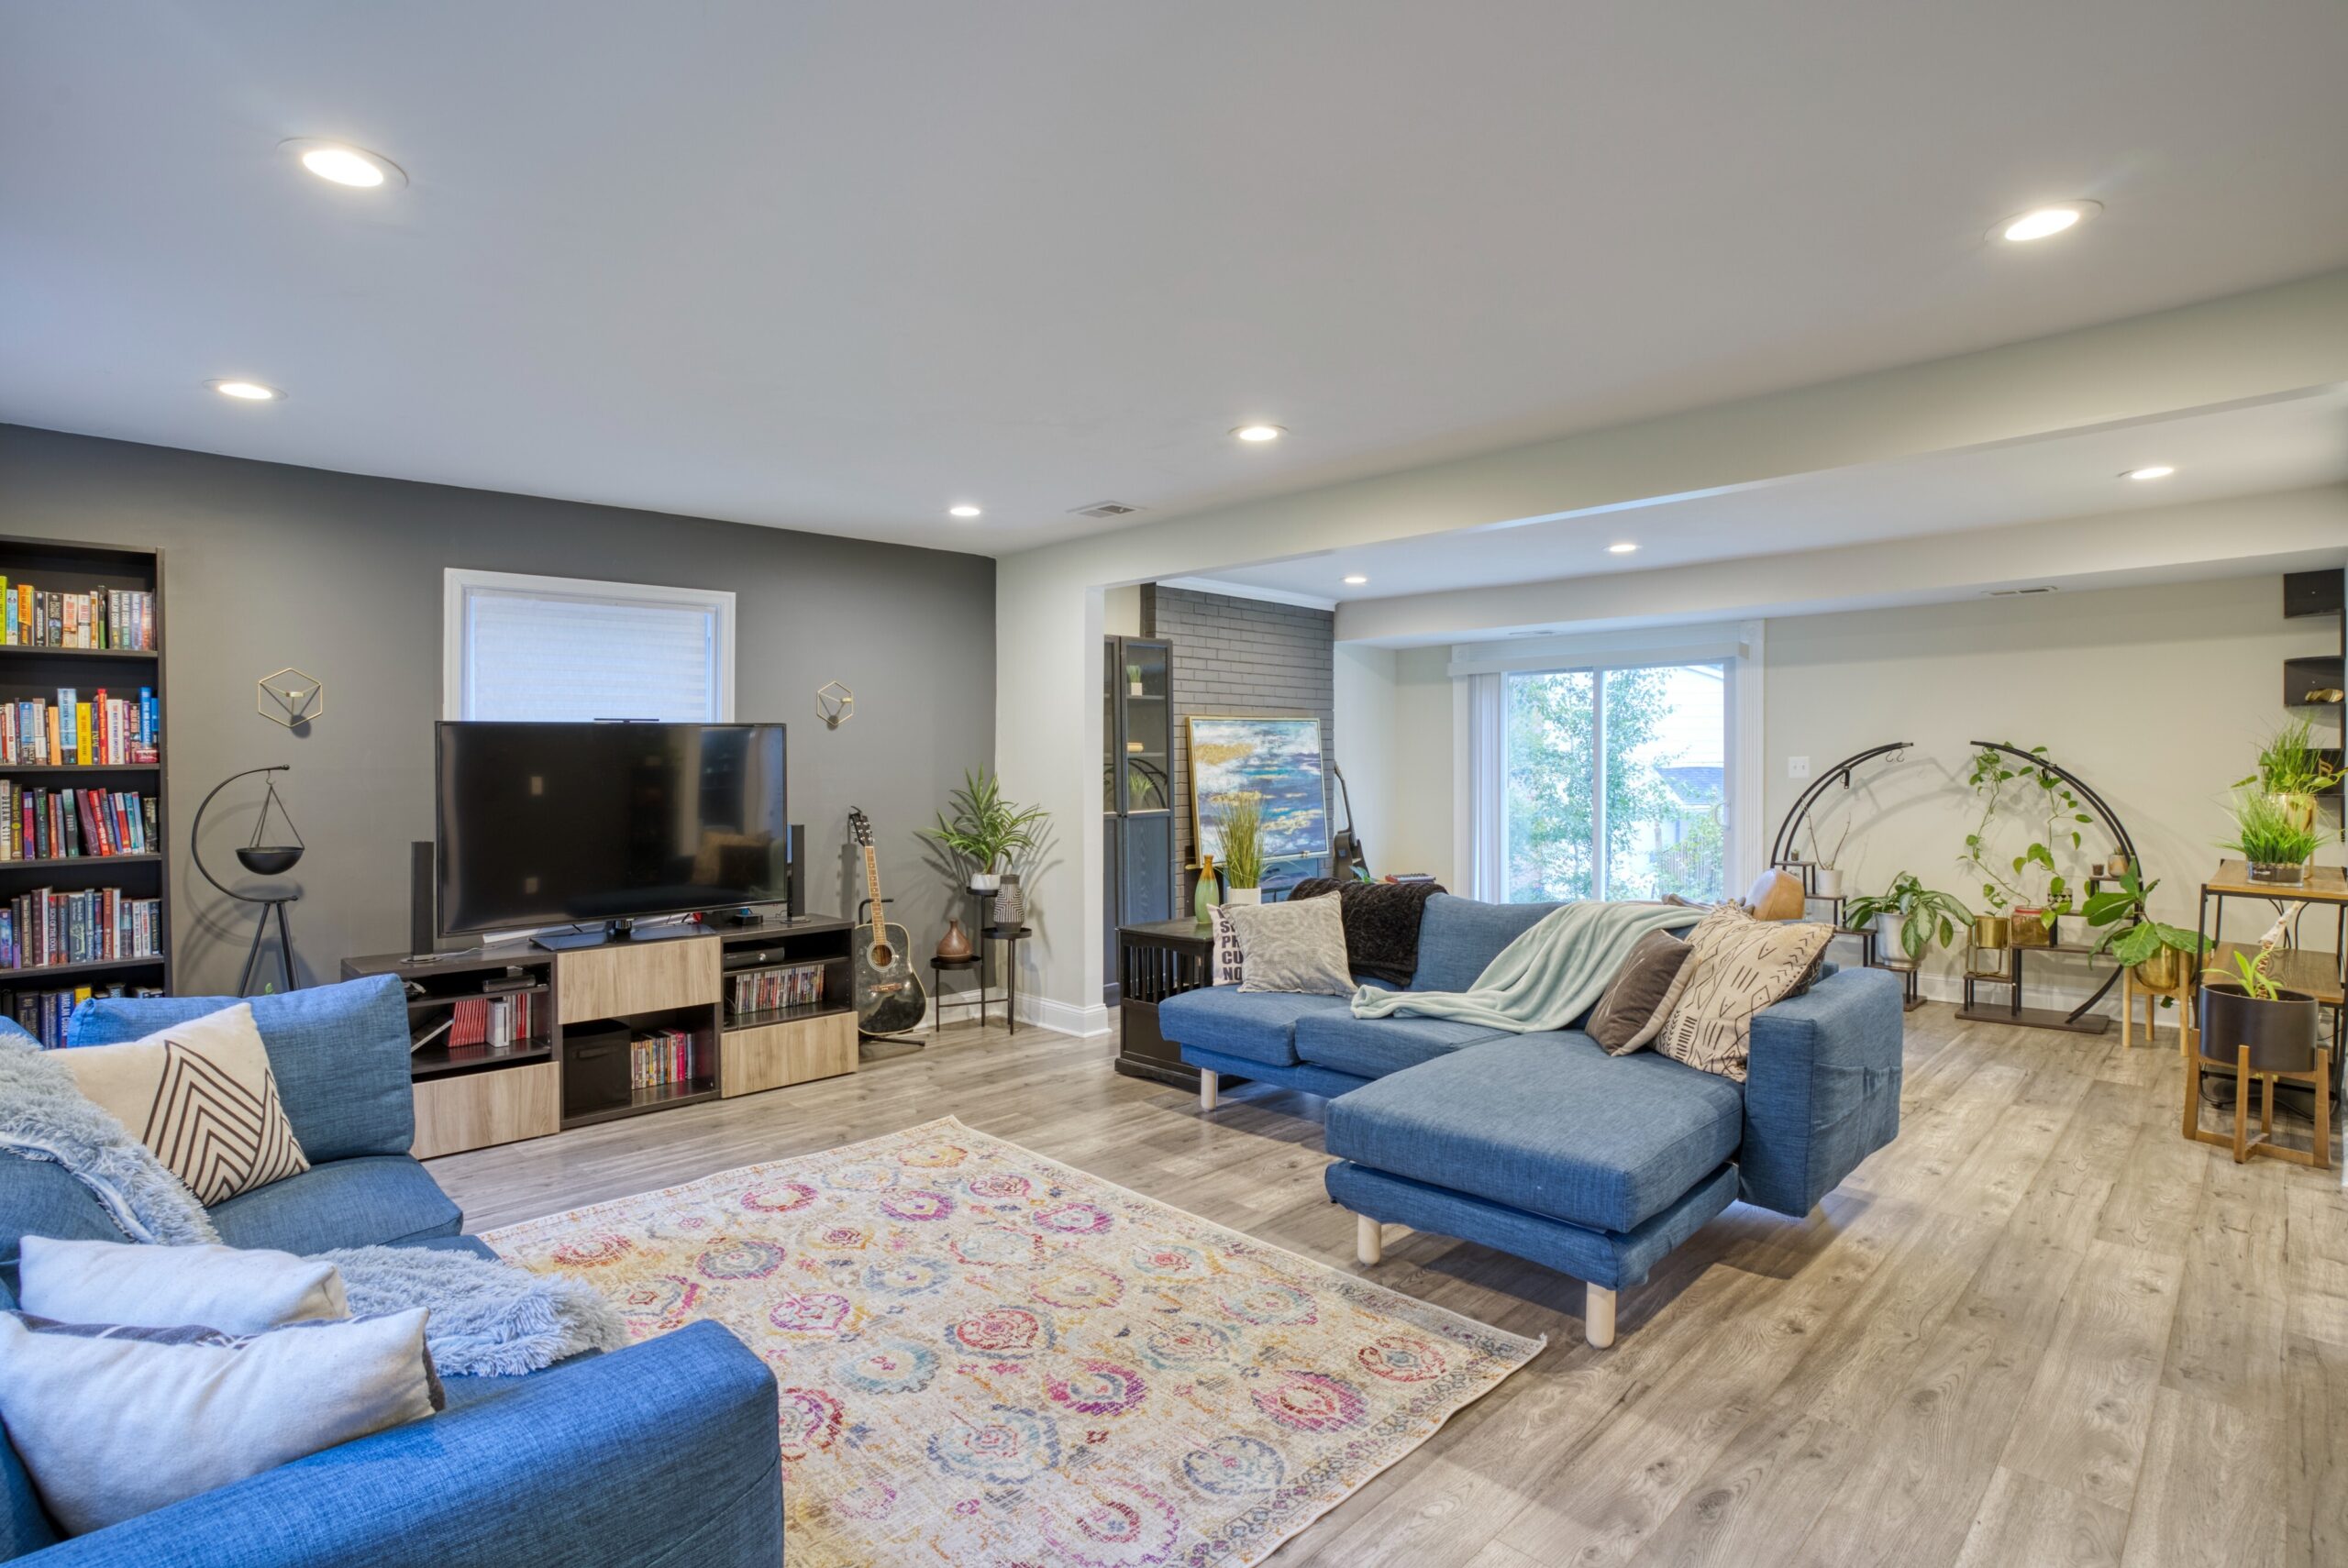 Interior professional photo of 9015 Longbow Rd - showing modern living room, nicely staged